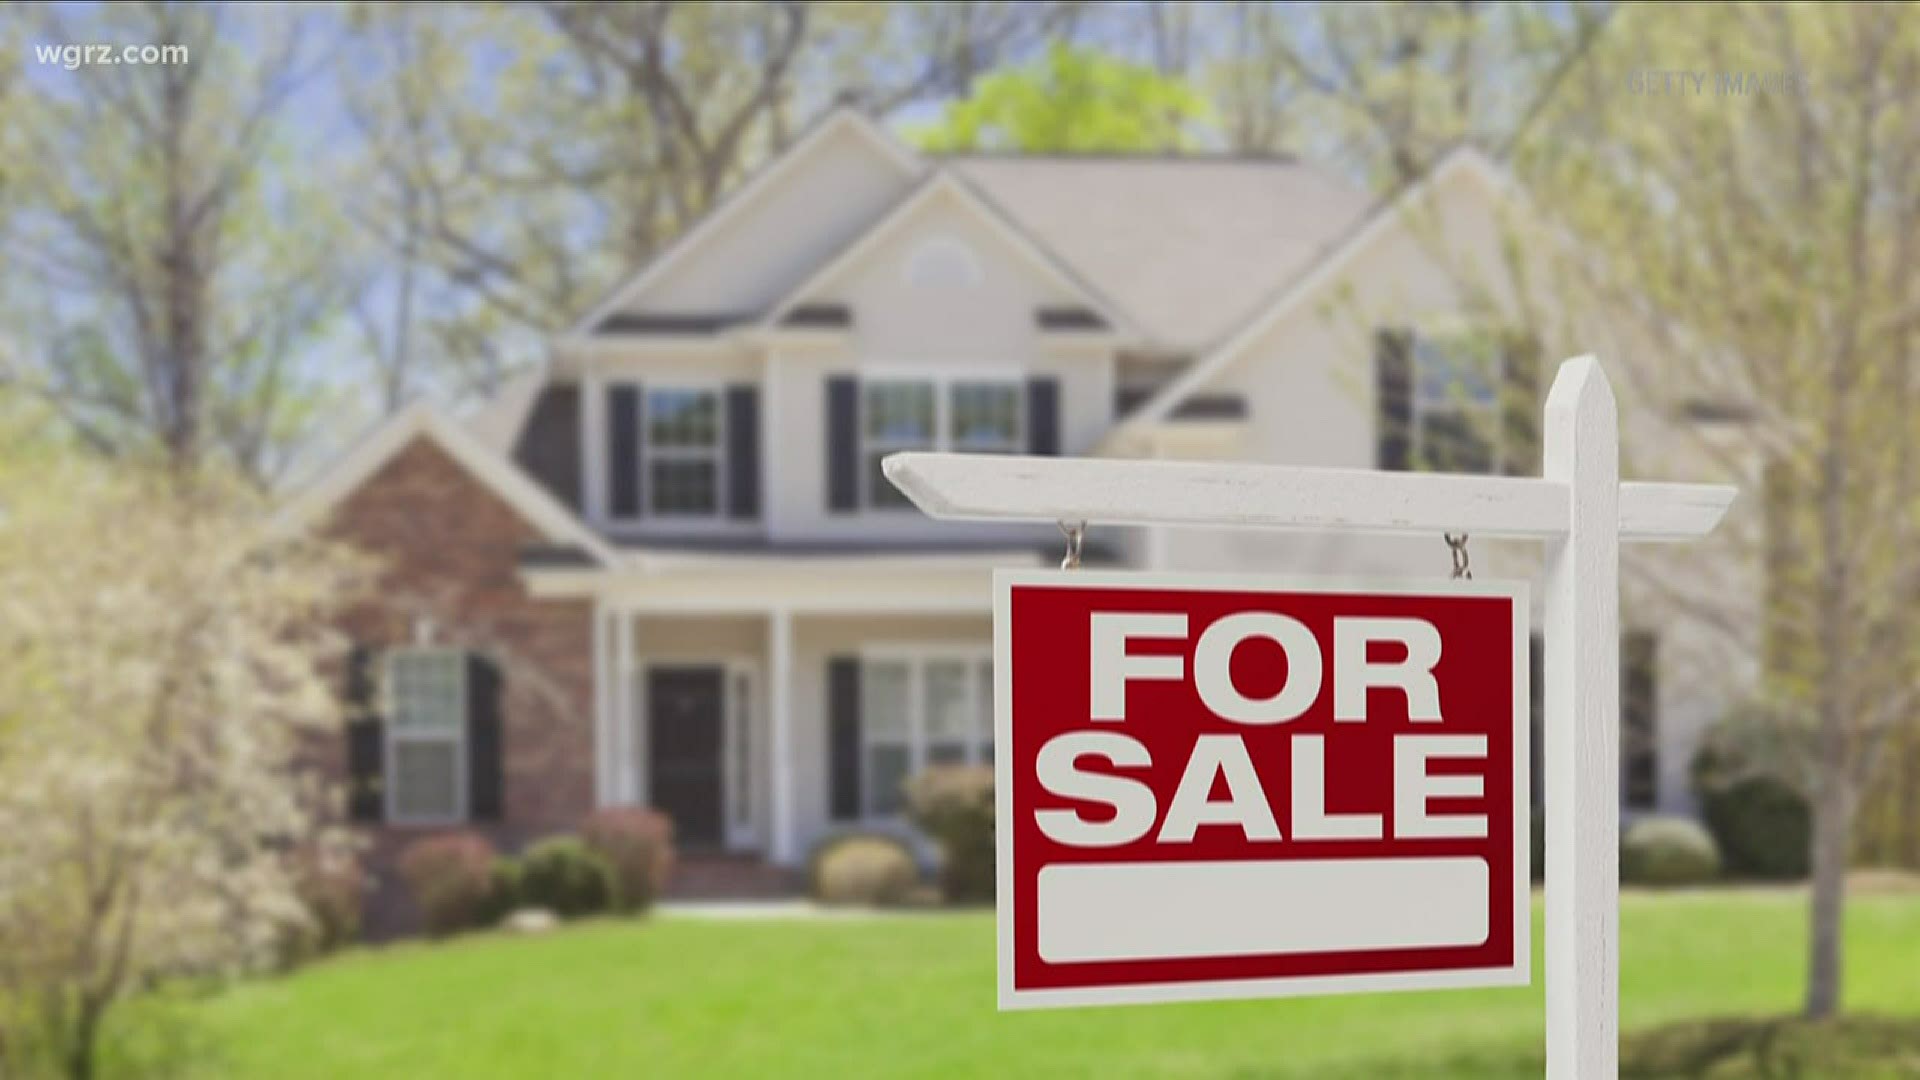 While it's not the most ideal time for a home purchase or sale, the real estate market certainly isn't stagnant in Western New York.